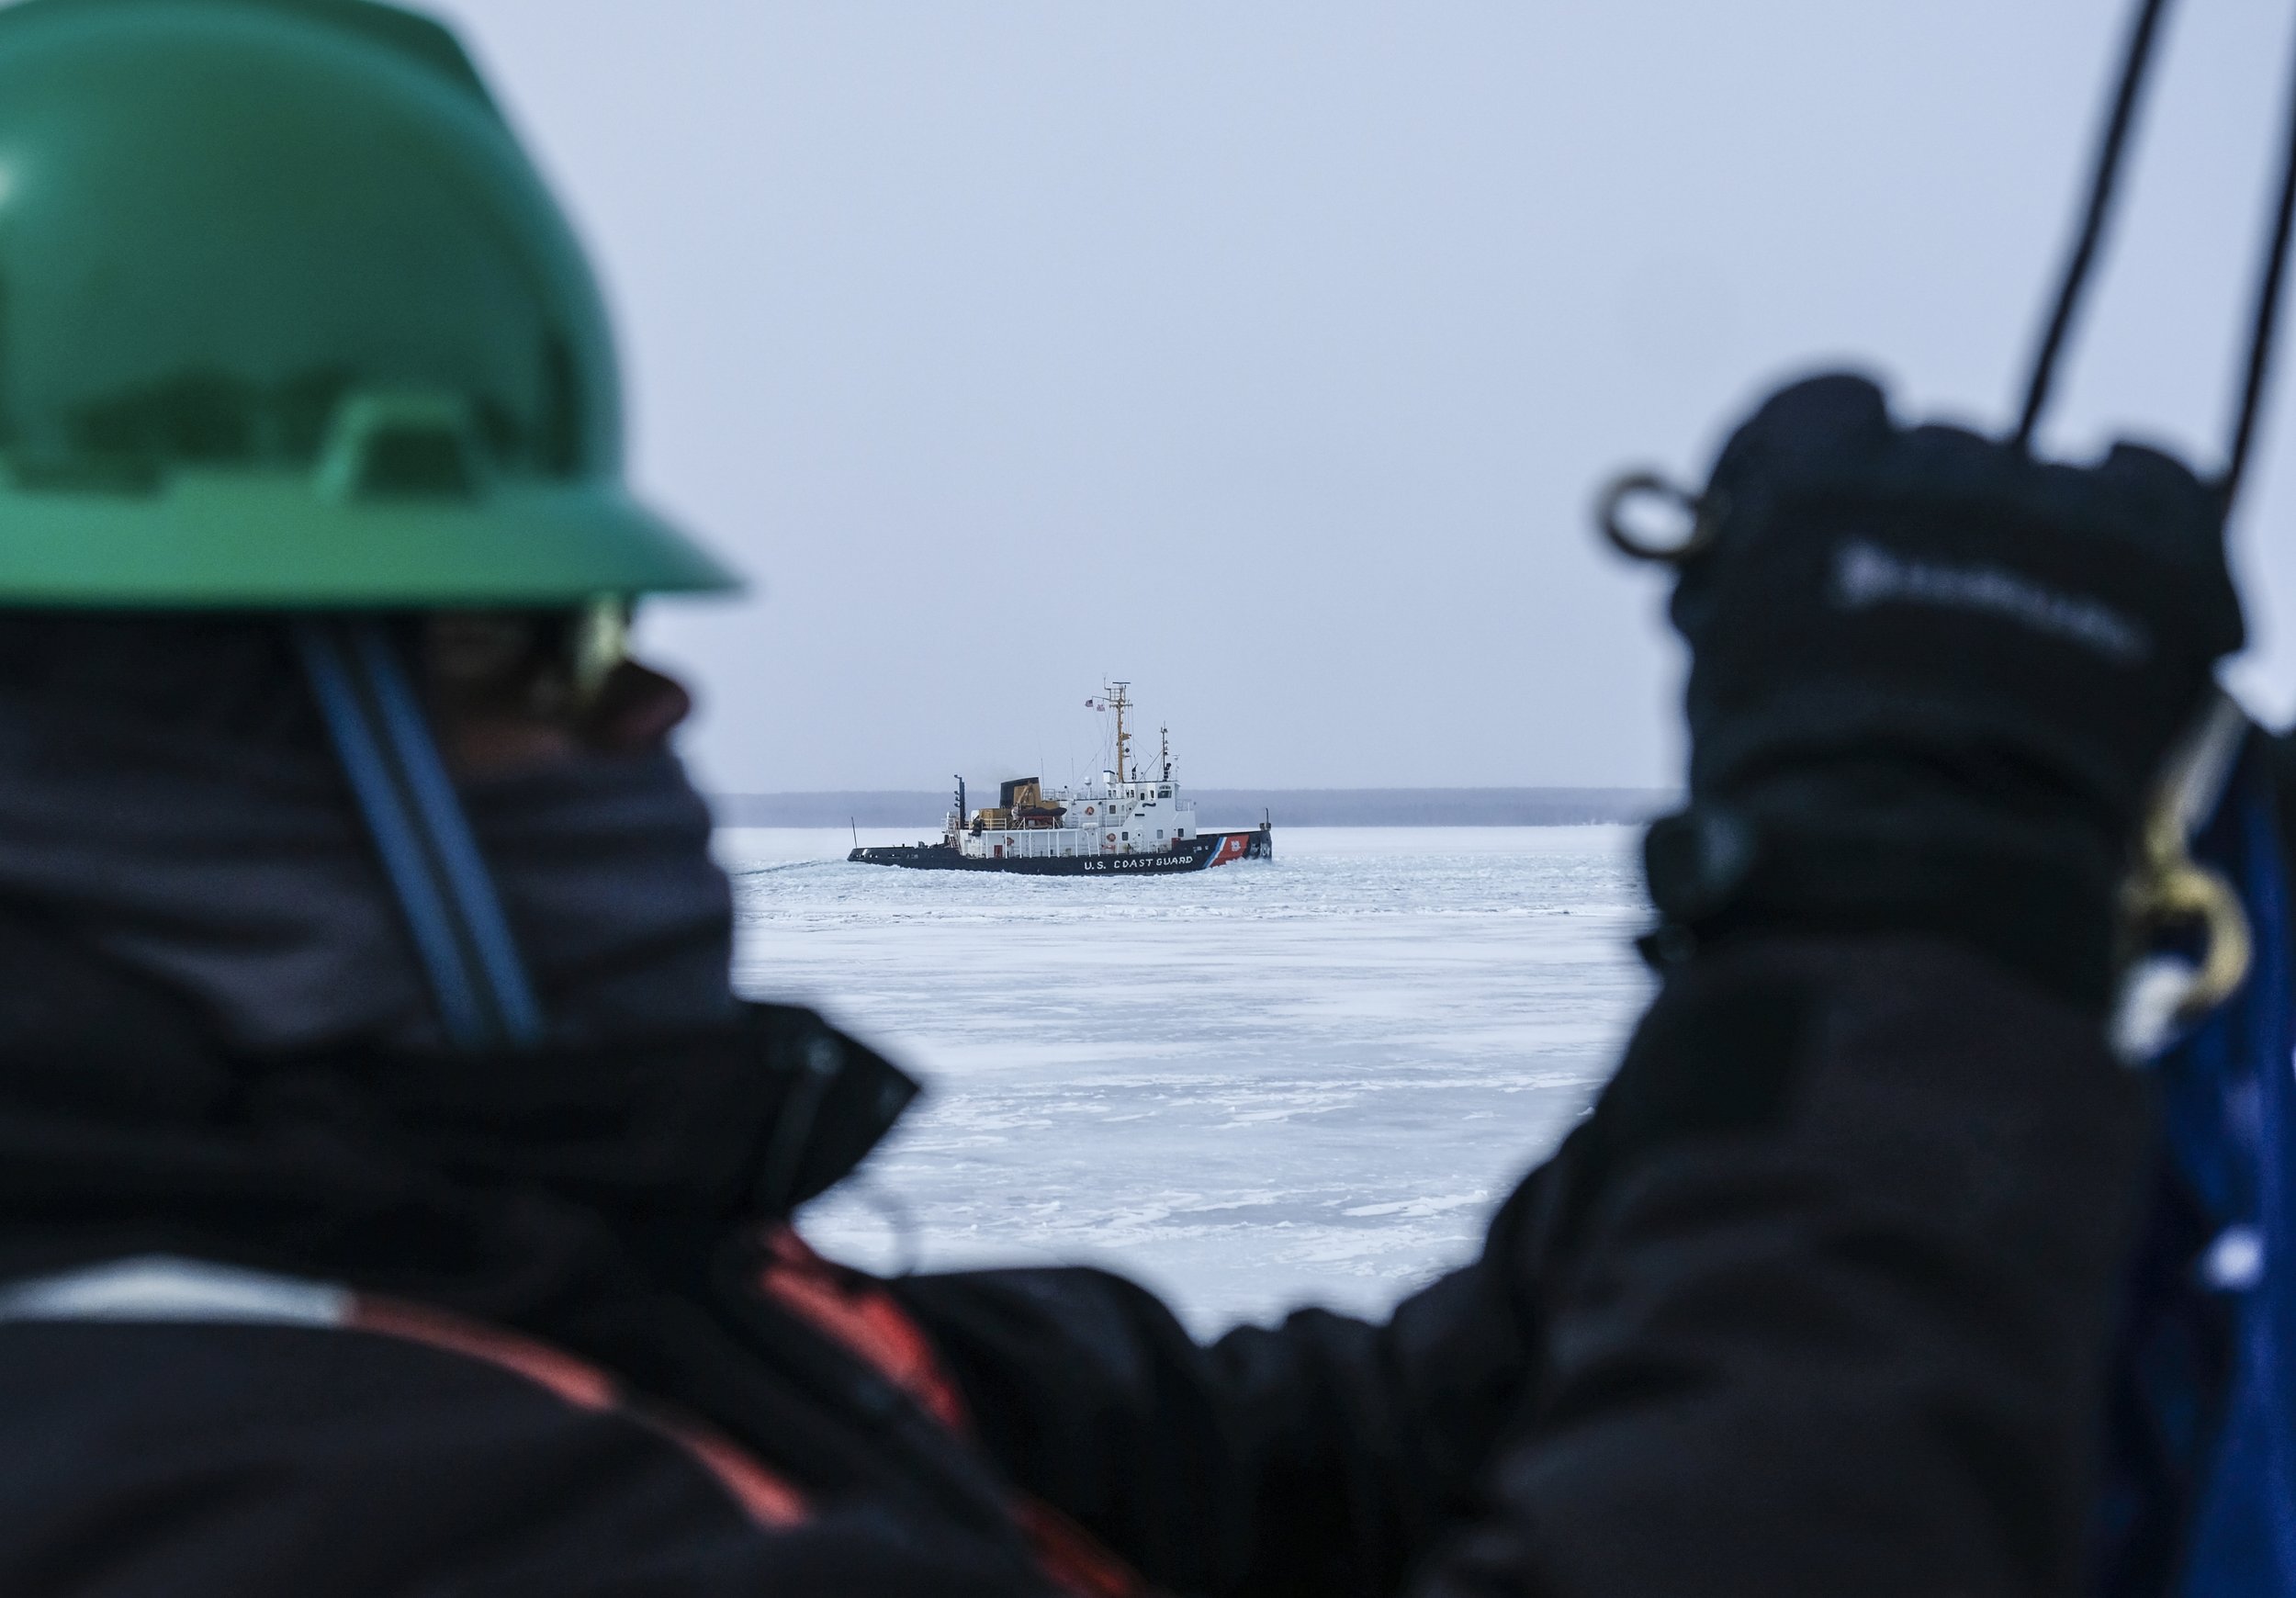  Seaman Dayon Caron Marcoos ties on the Union Jack to the back of the US Coast Guard Cutter 'Katmai Bay' after mooring at Lime Island following ice-breaking operations on Tuesday, March 14, 2023, near Lake Huron as the USCGC Morro Bay, another Ice Br